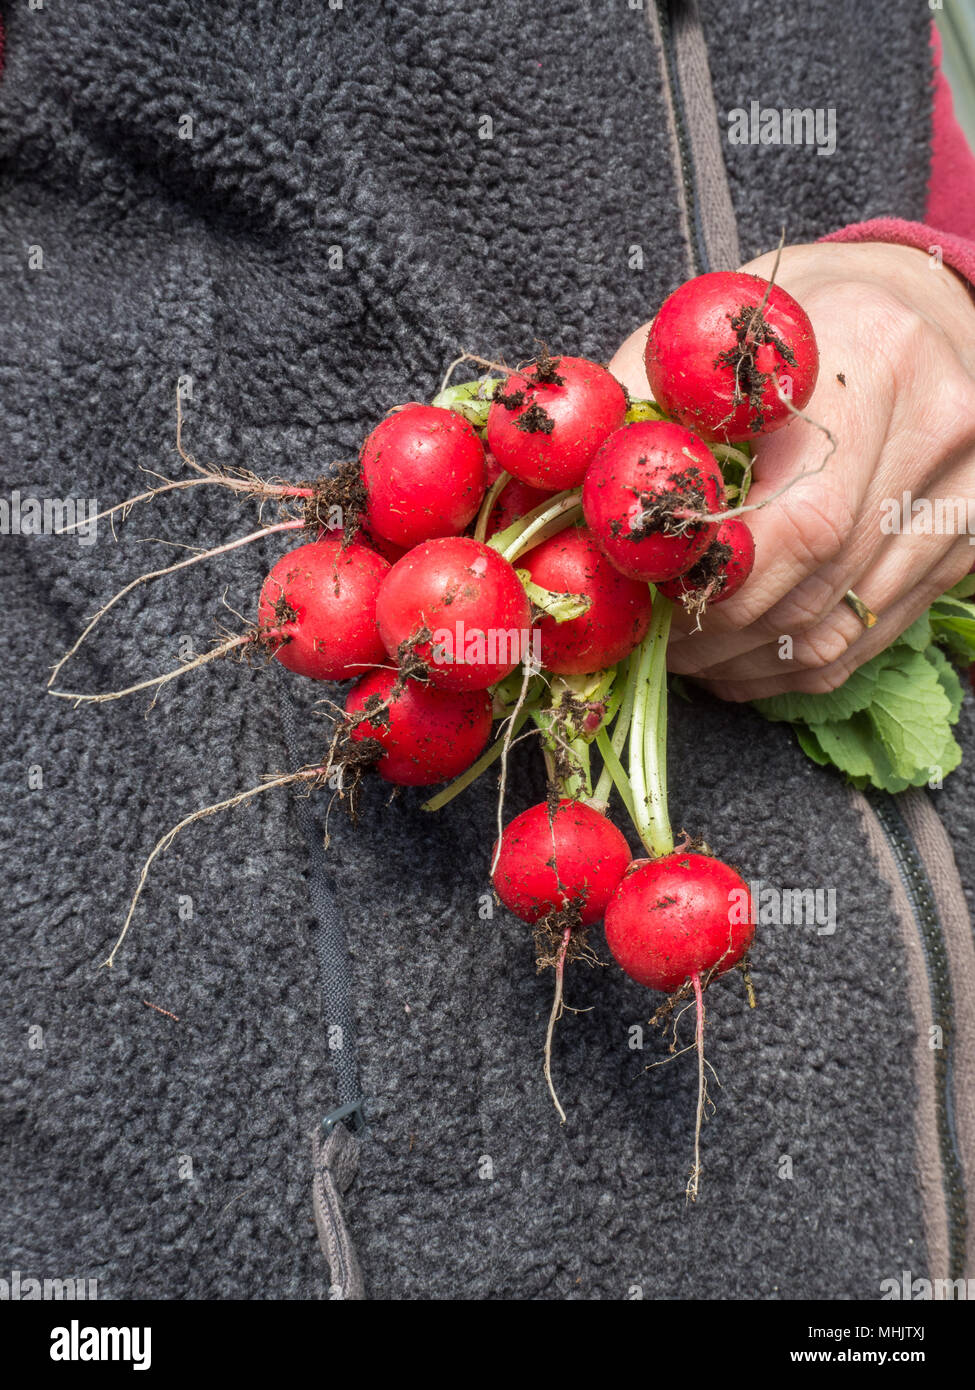 A bunch of newly harvested radish Scarlet Globe being held in a hand Stock Photo